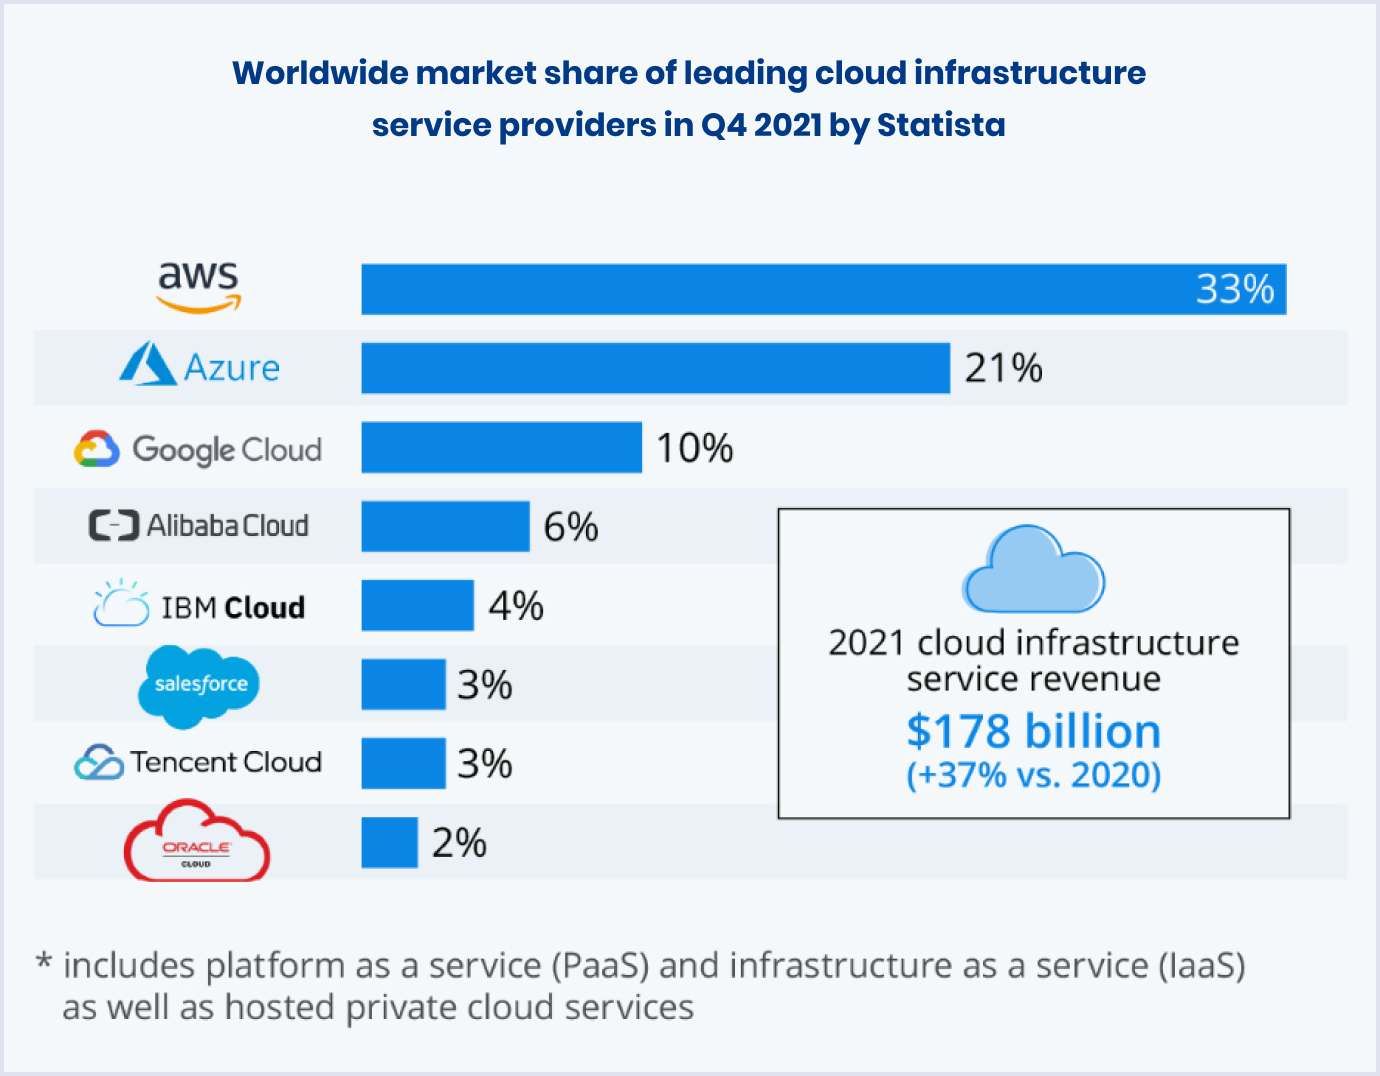 Worldwide market share of leading cloud infrastructure service providers in Q4 2021 by Statista